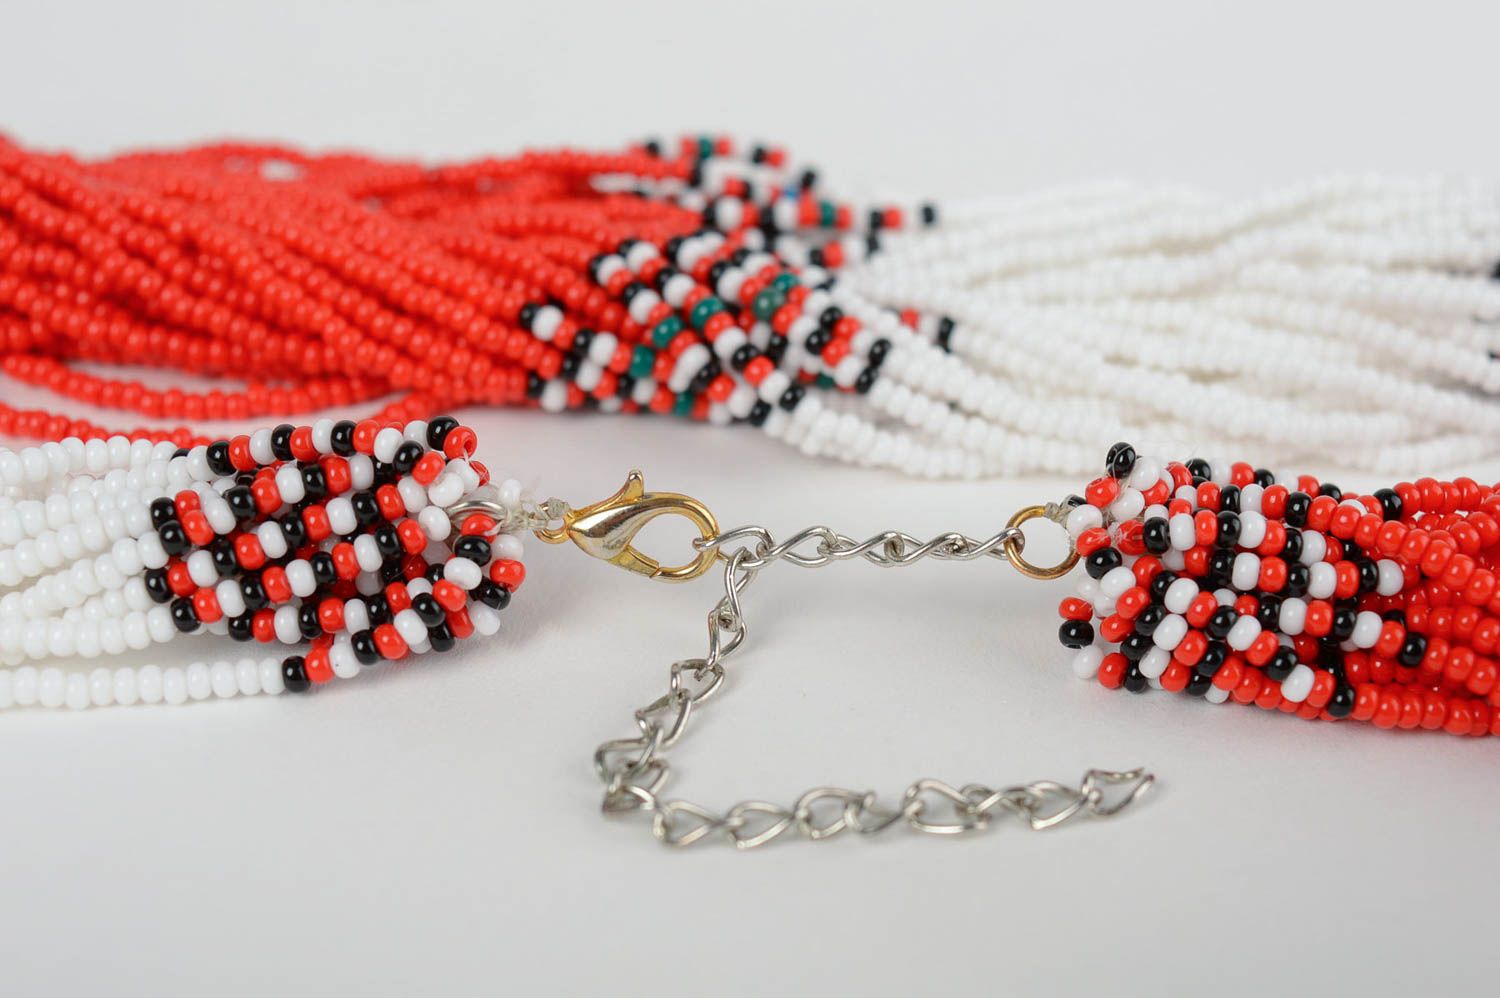 Unusual handmade beaded necklace fashion accessories cool jewelry gifts for her photo 4